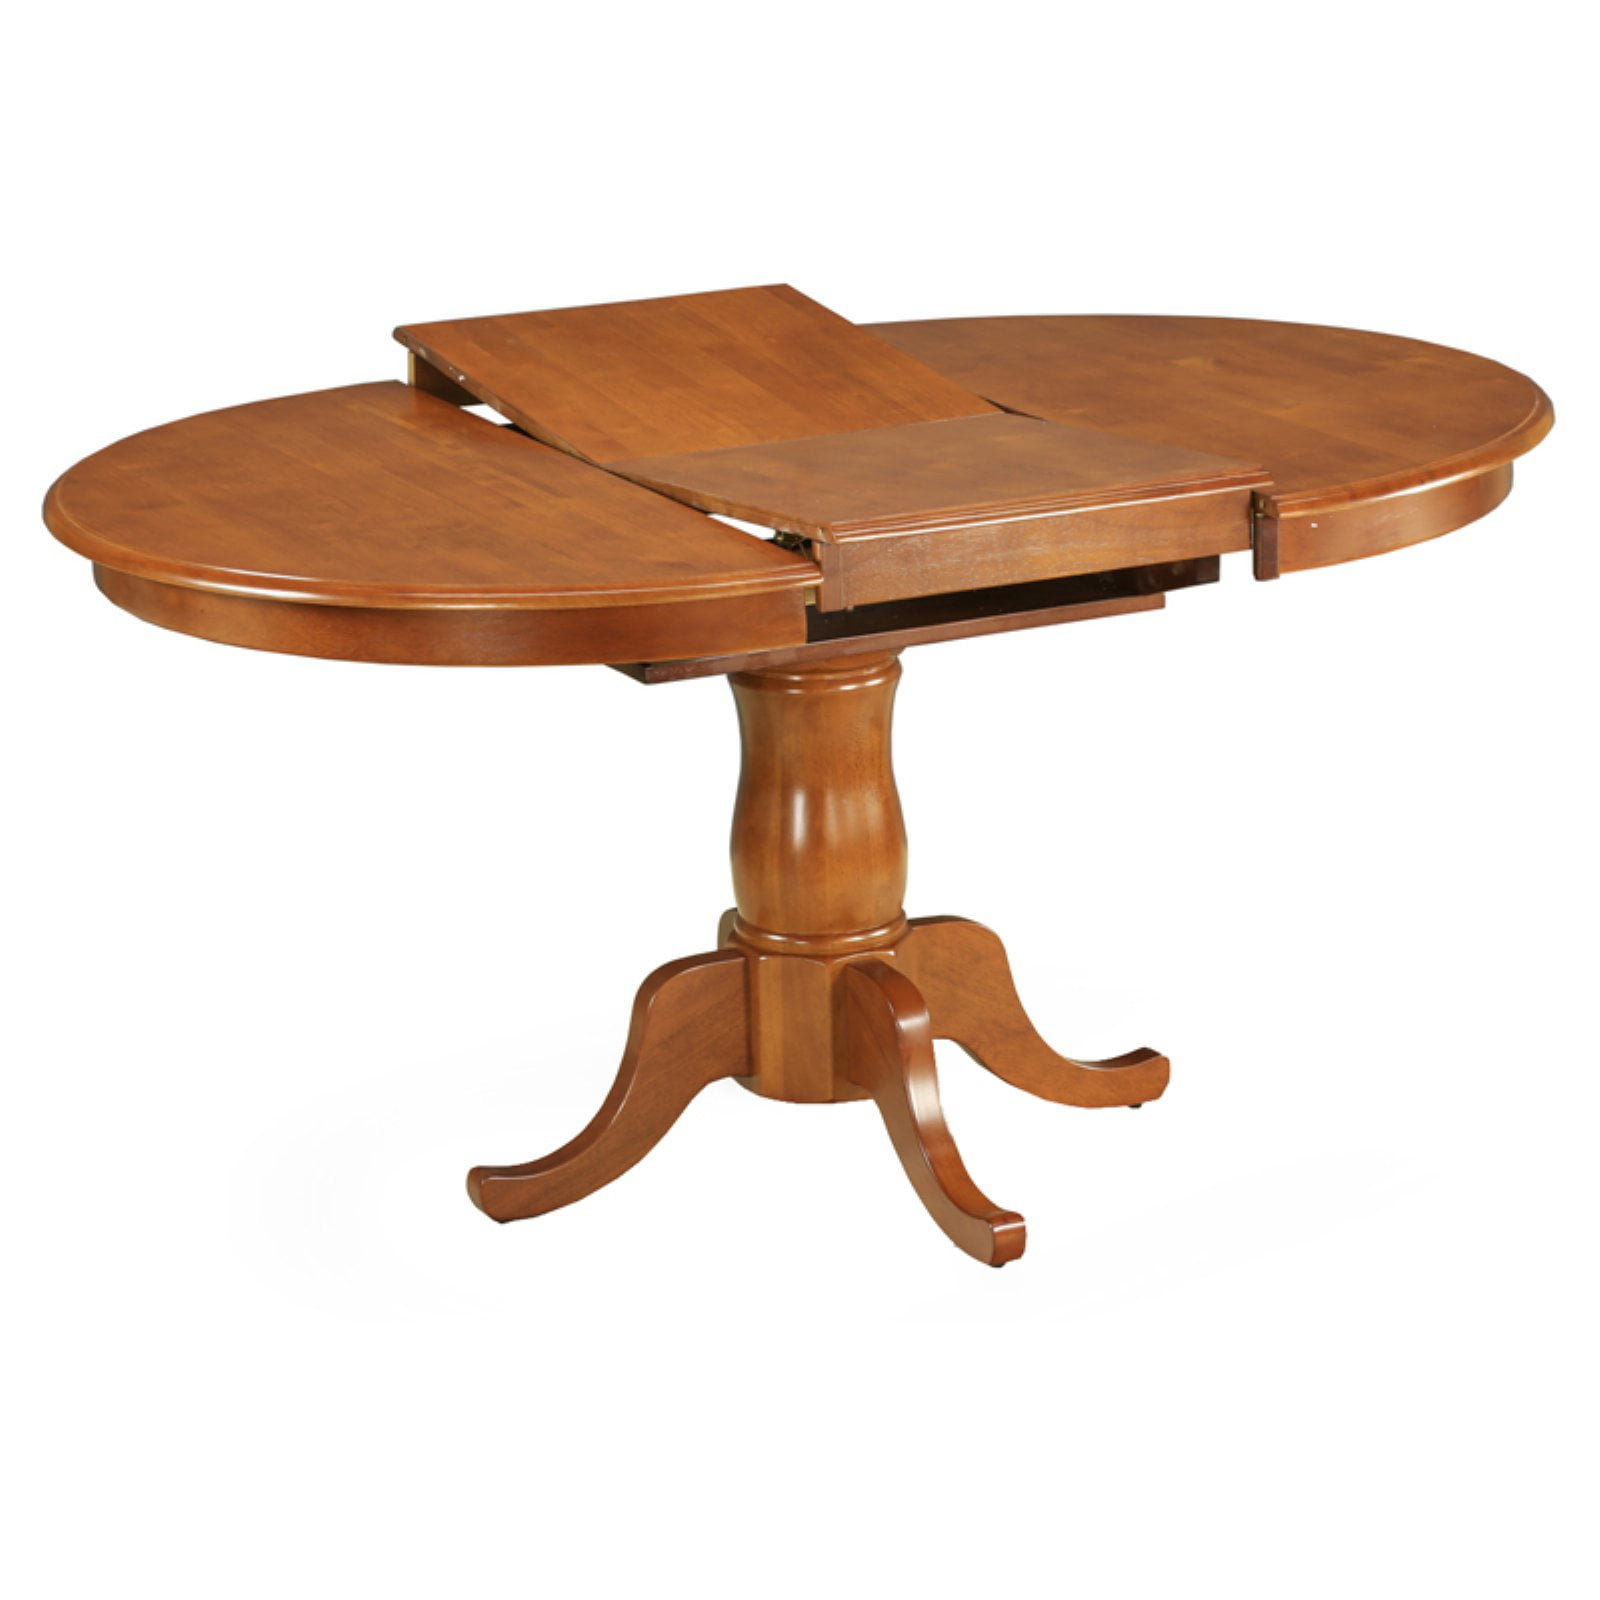 Oval Pedestal Dining Table, 60 Inch Round Dining Table With Leaves